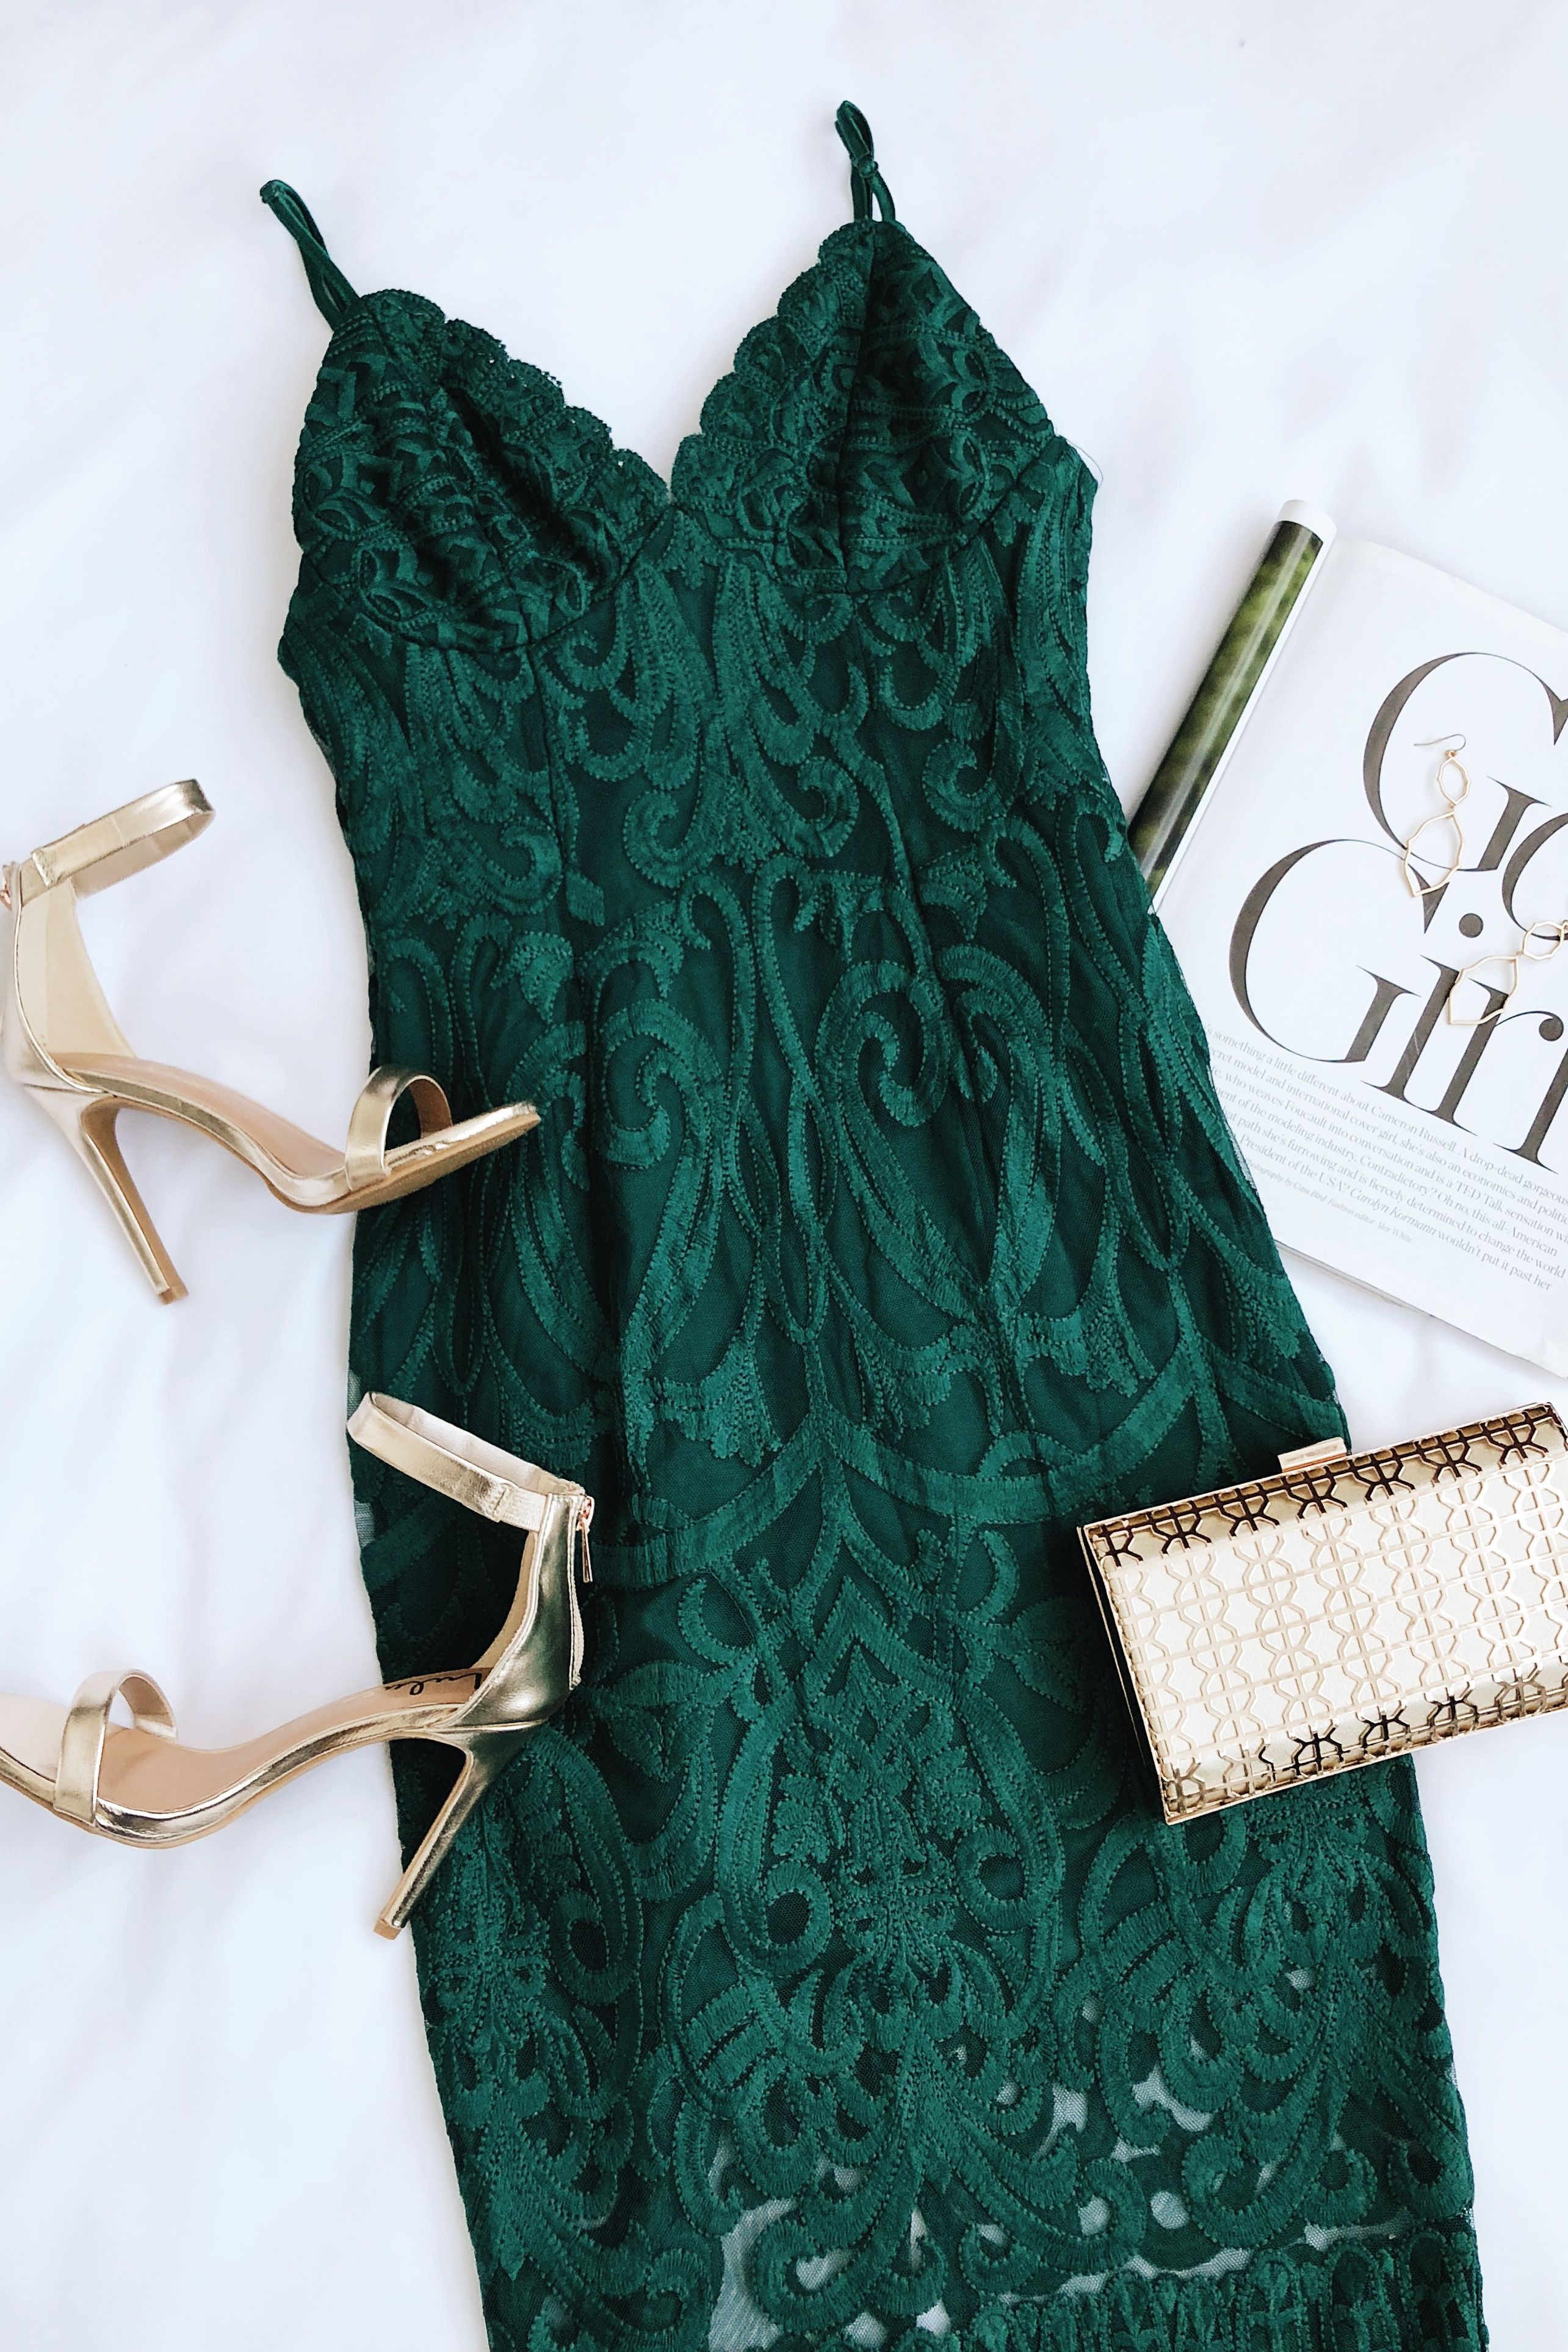 christmas party dress green